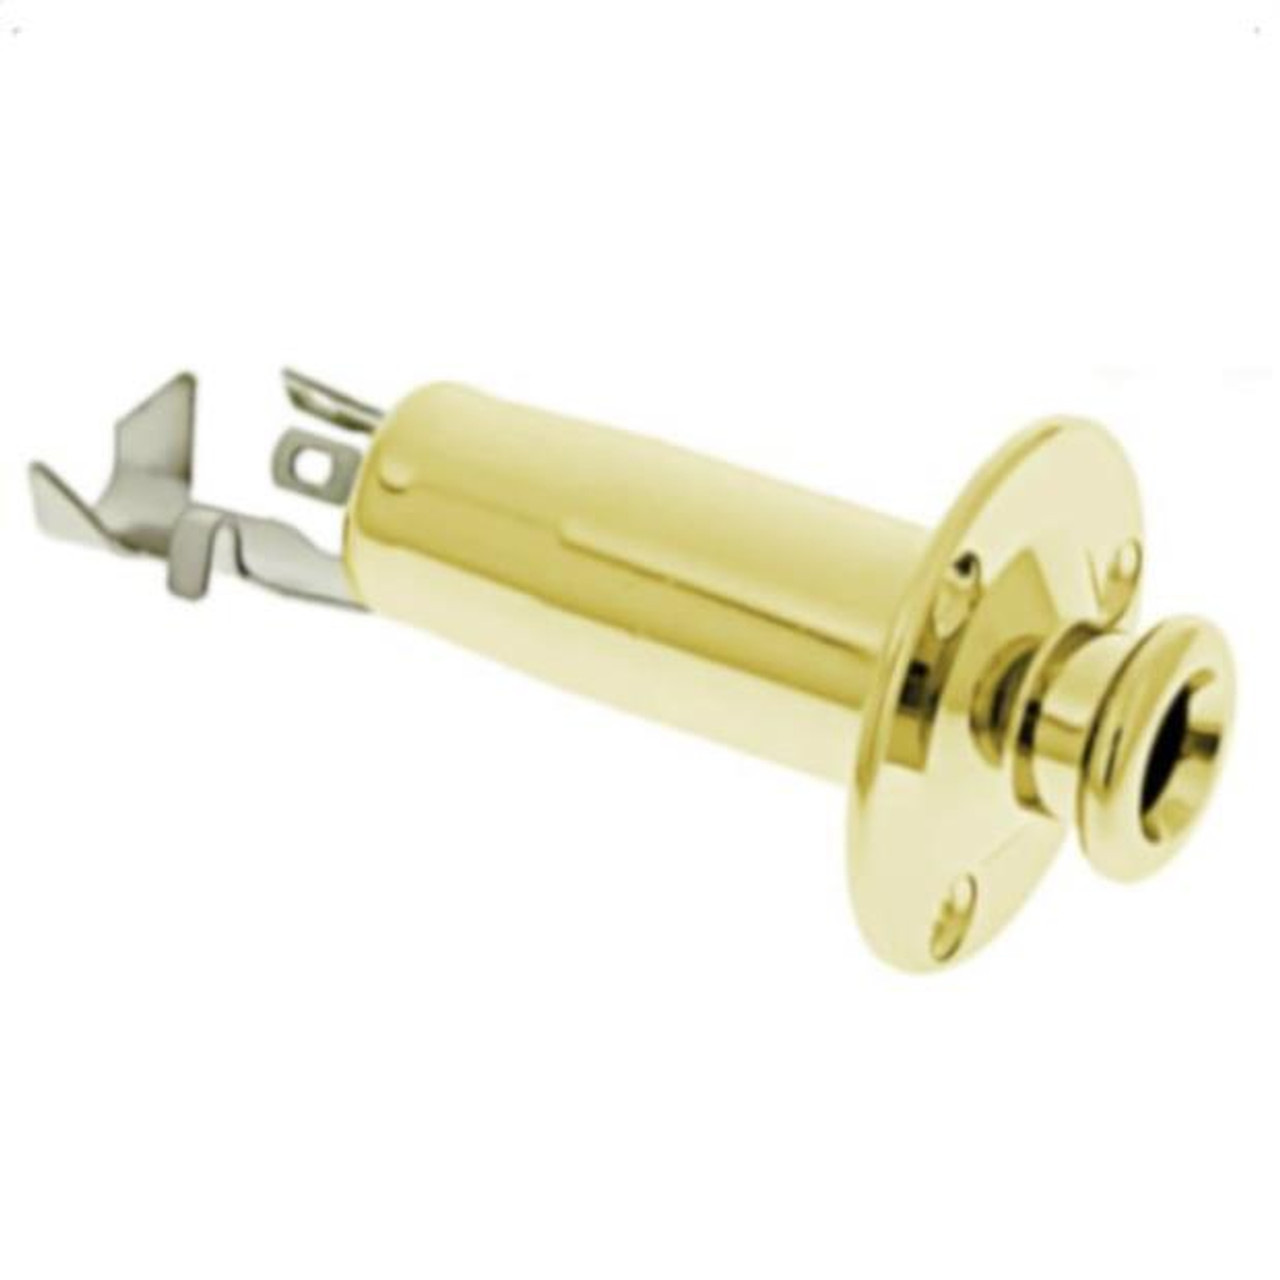 Acoustic End Pin Jack w/ 3 Screw Holes - Gold